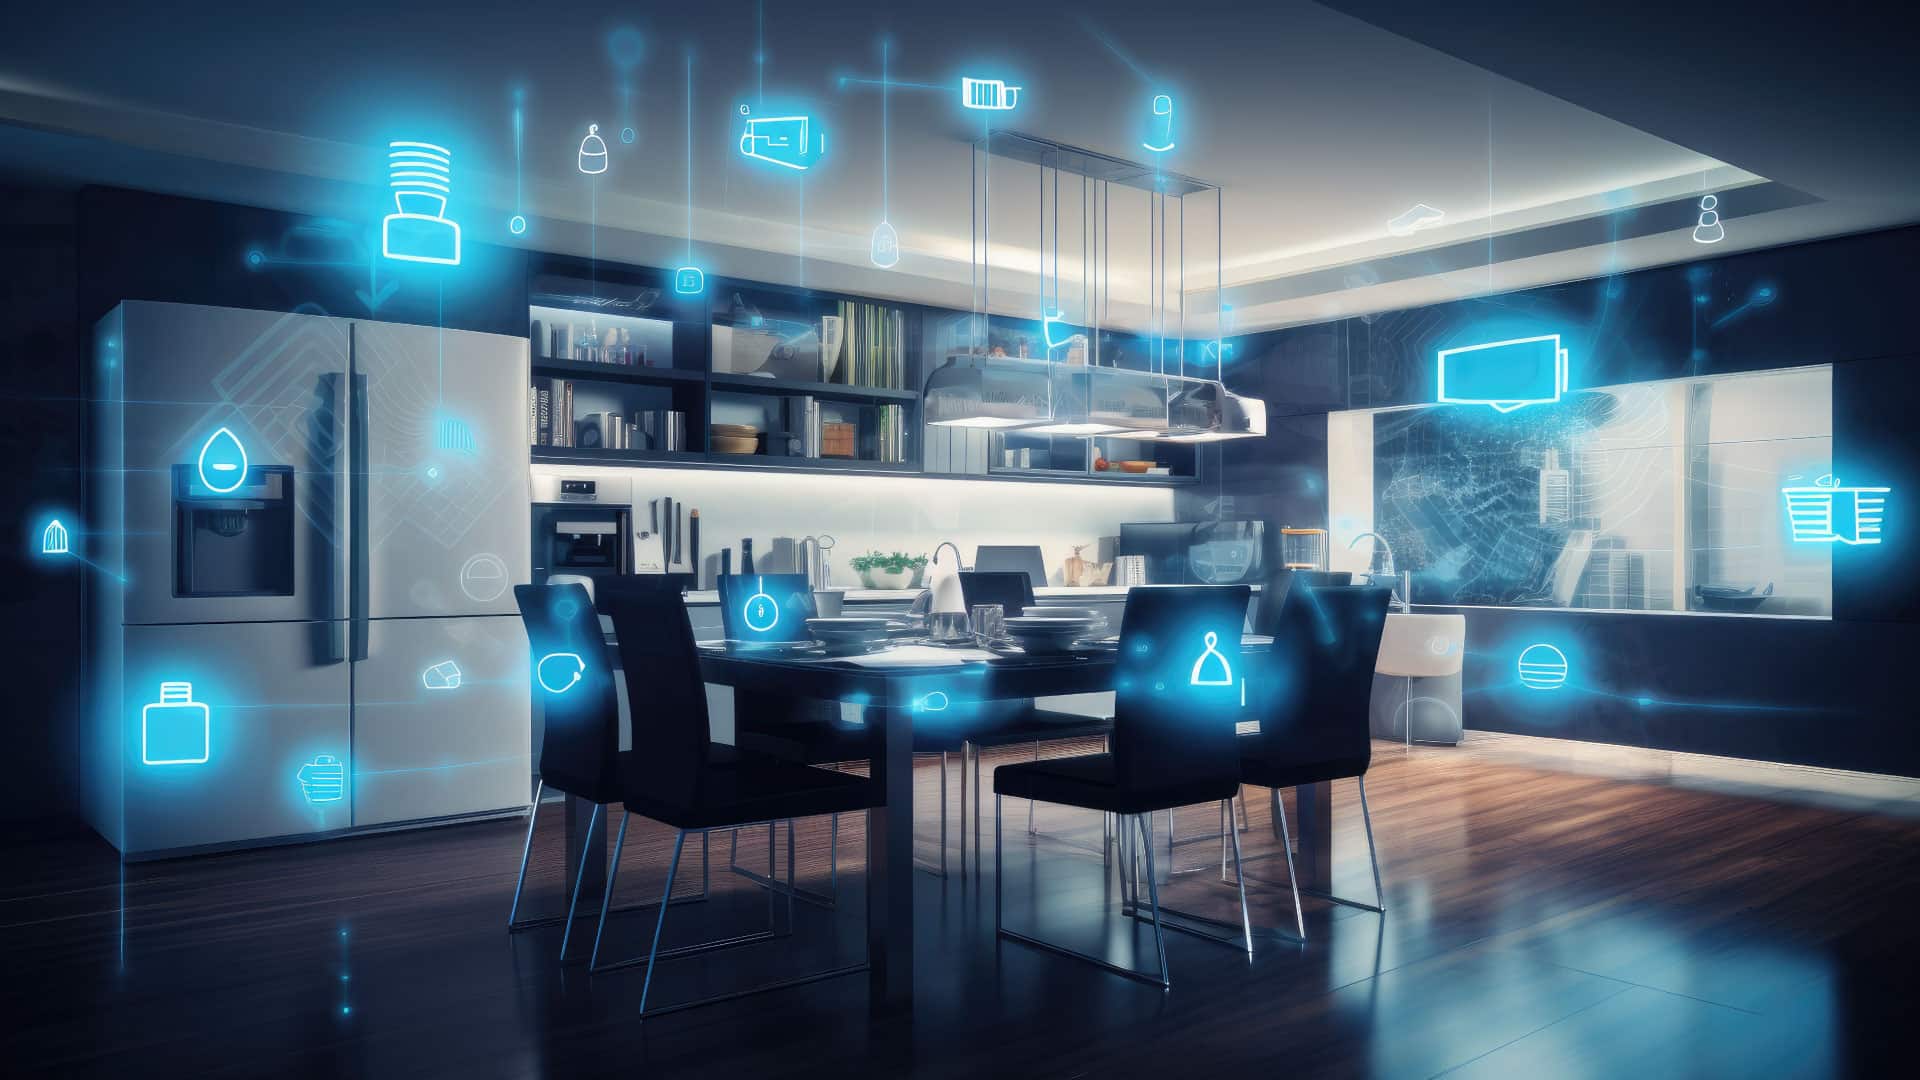 IoT connectivity in a smart home